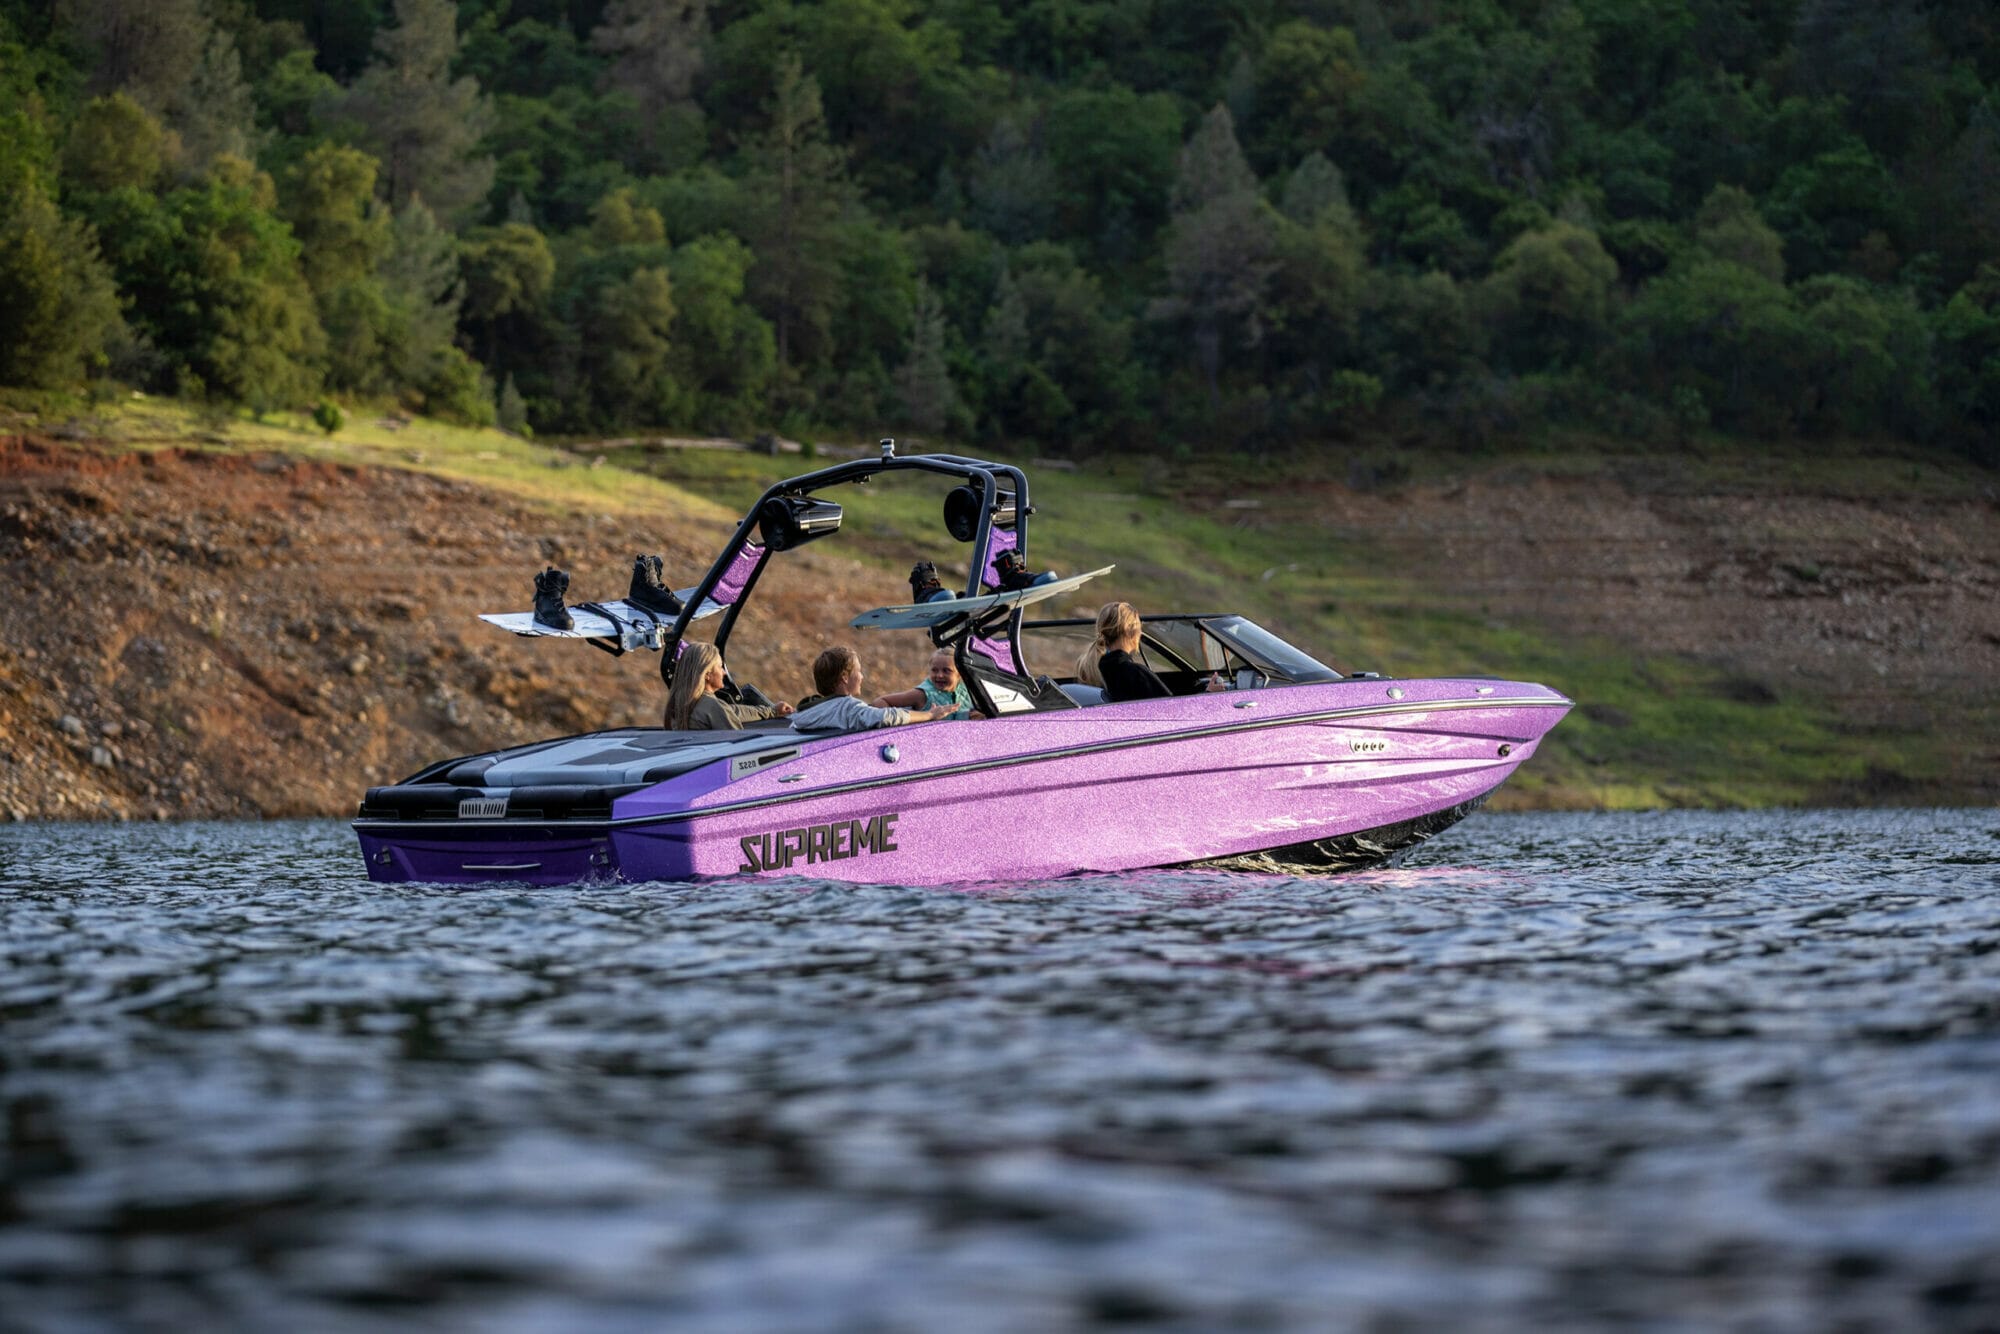 Purple S220 Supreme boat still in water with boaters inside